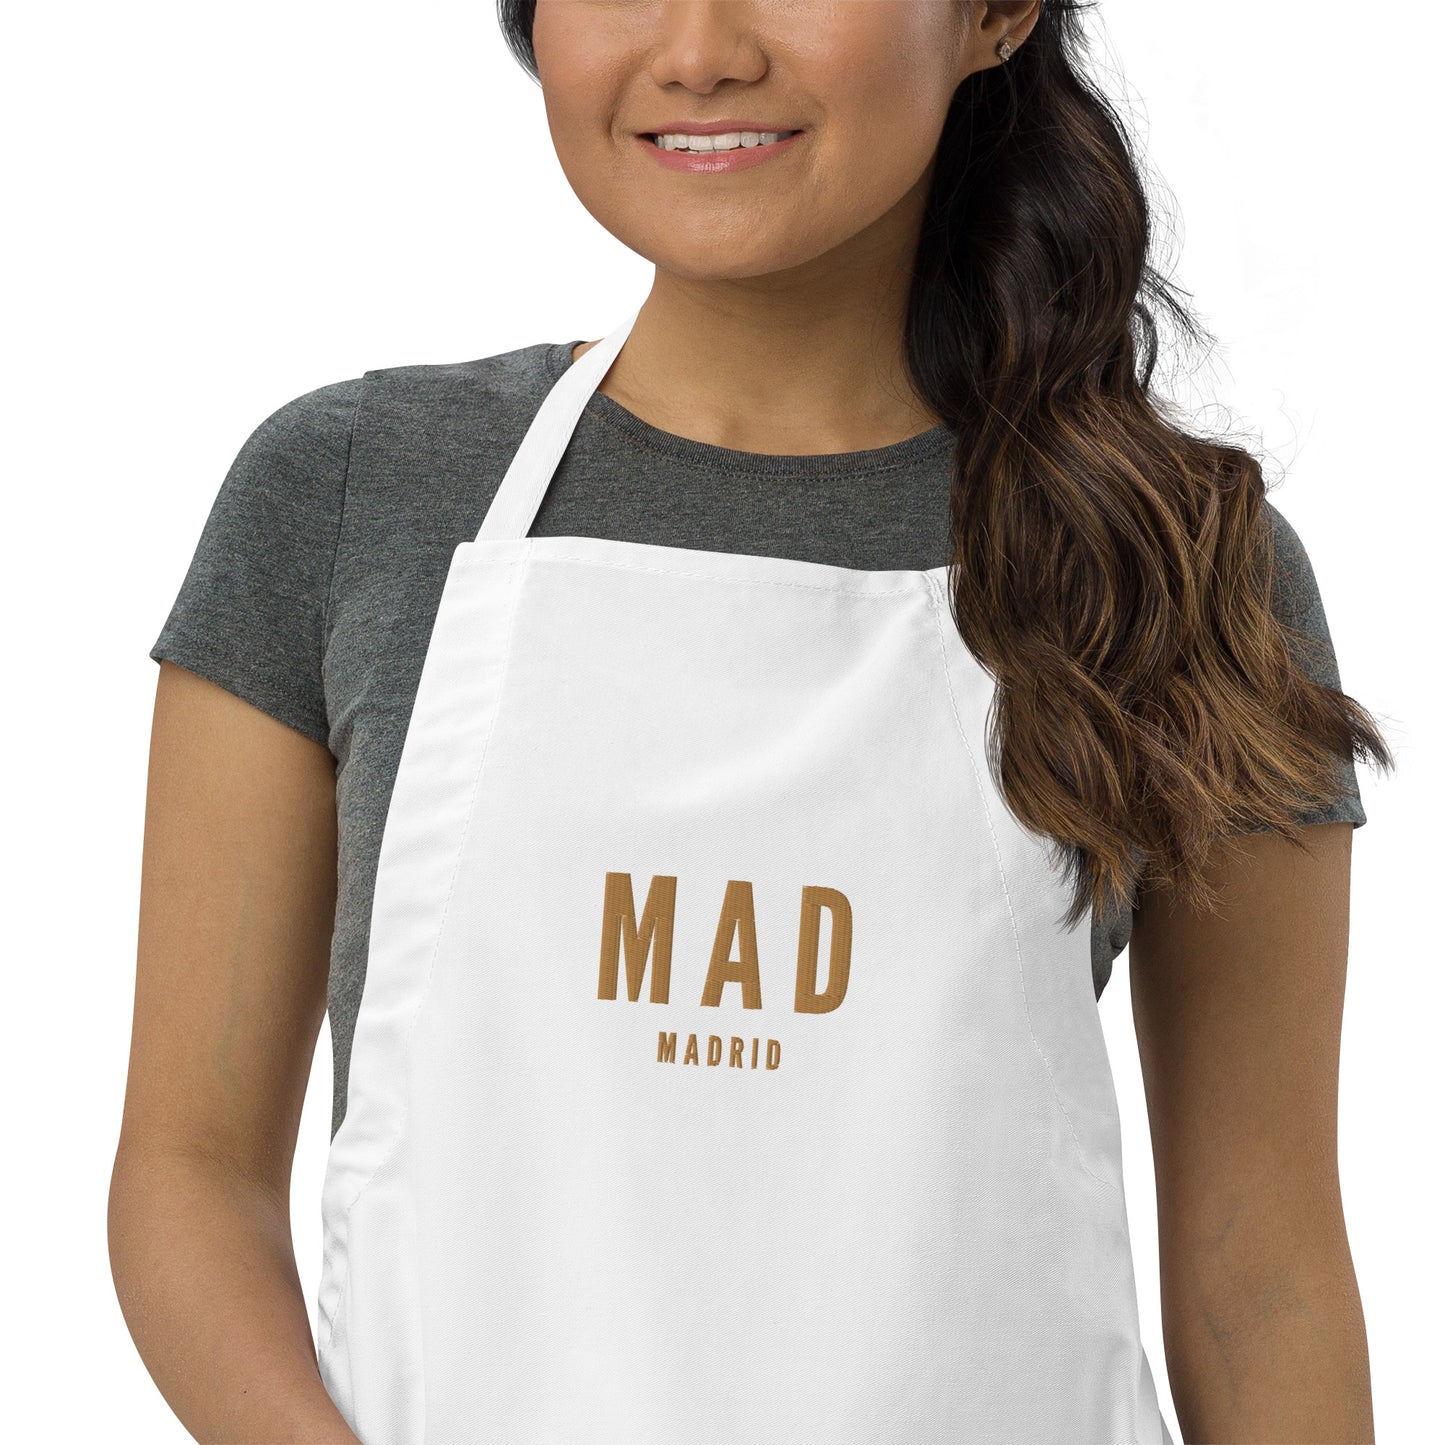 City Embroidered Apron - Old Gold • MAD Madrid • YHM Designs - Image 08